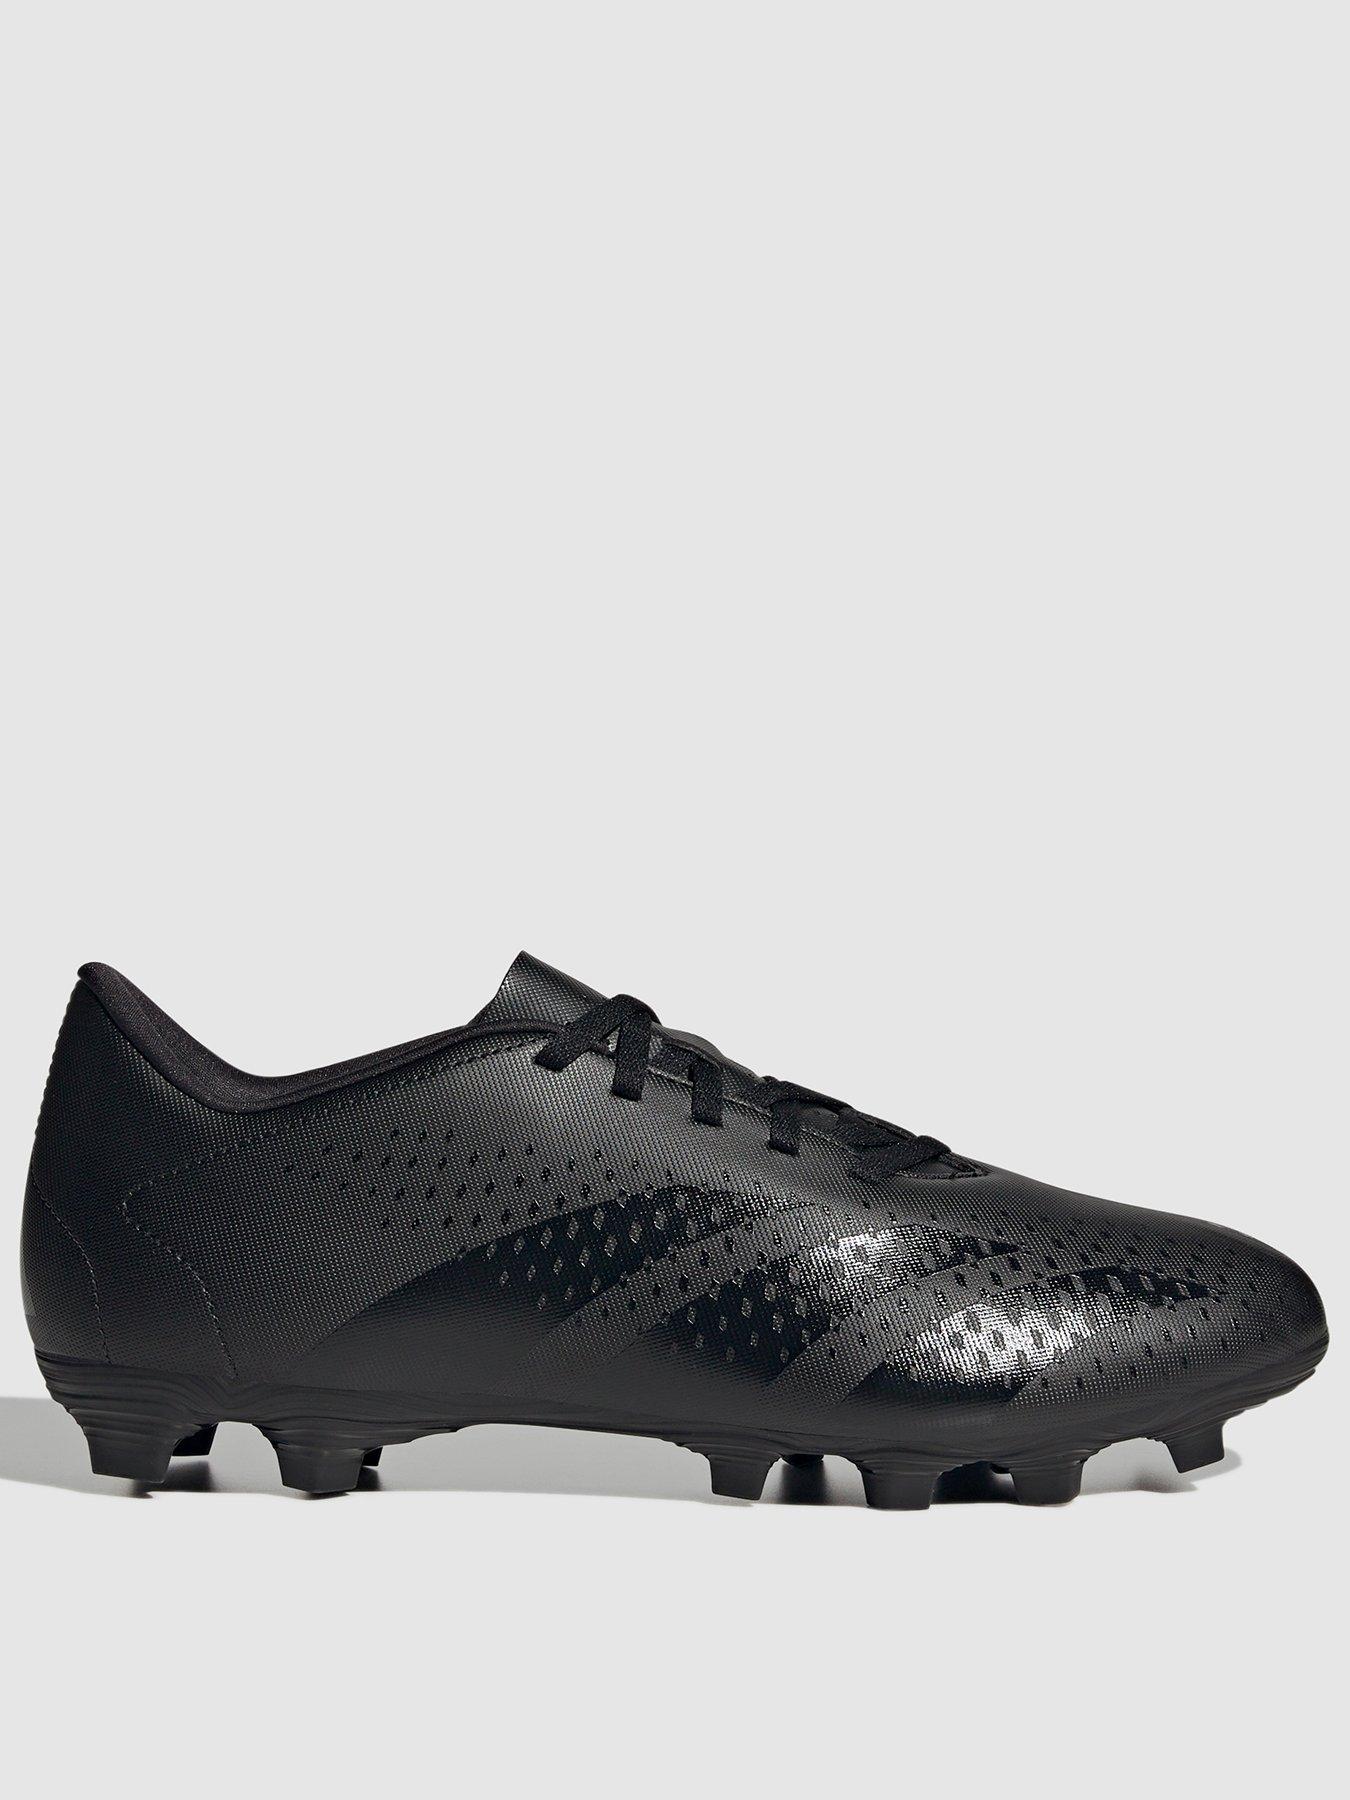 Adidas Football Boots | Free Delivery | Very